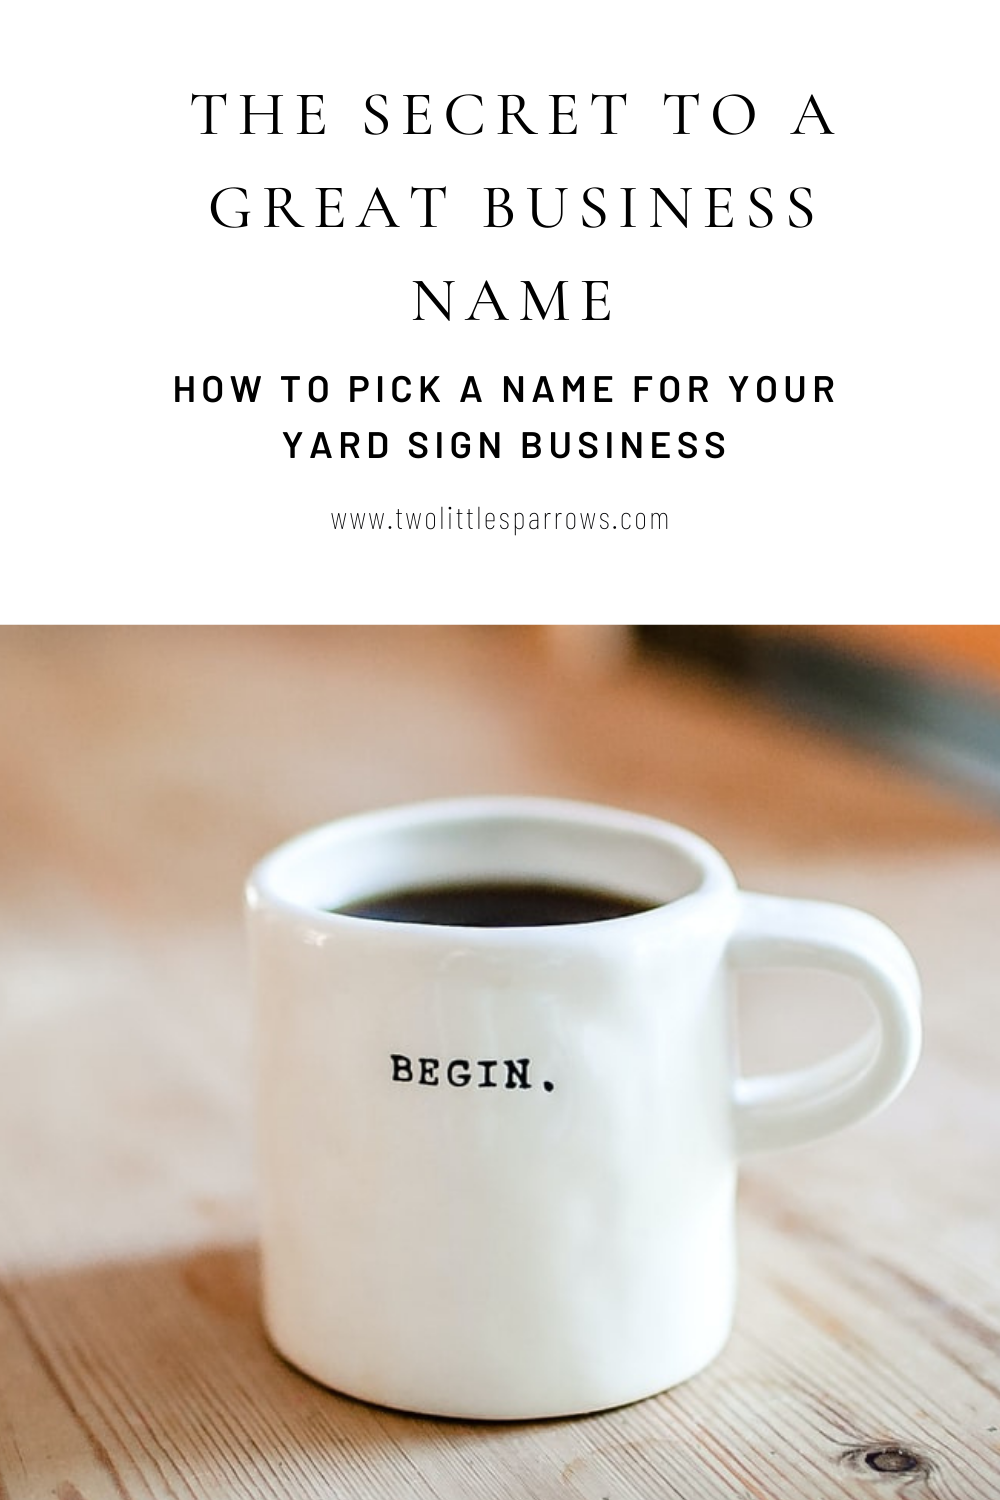 How to pick a name for your Yard Sign Business